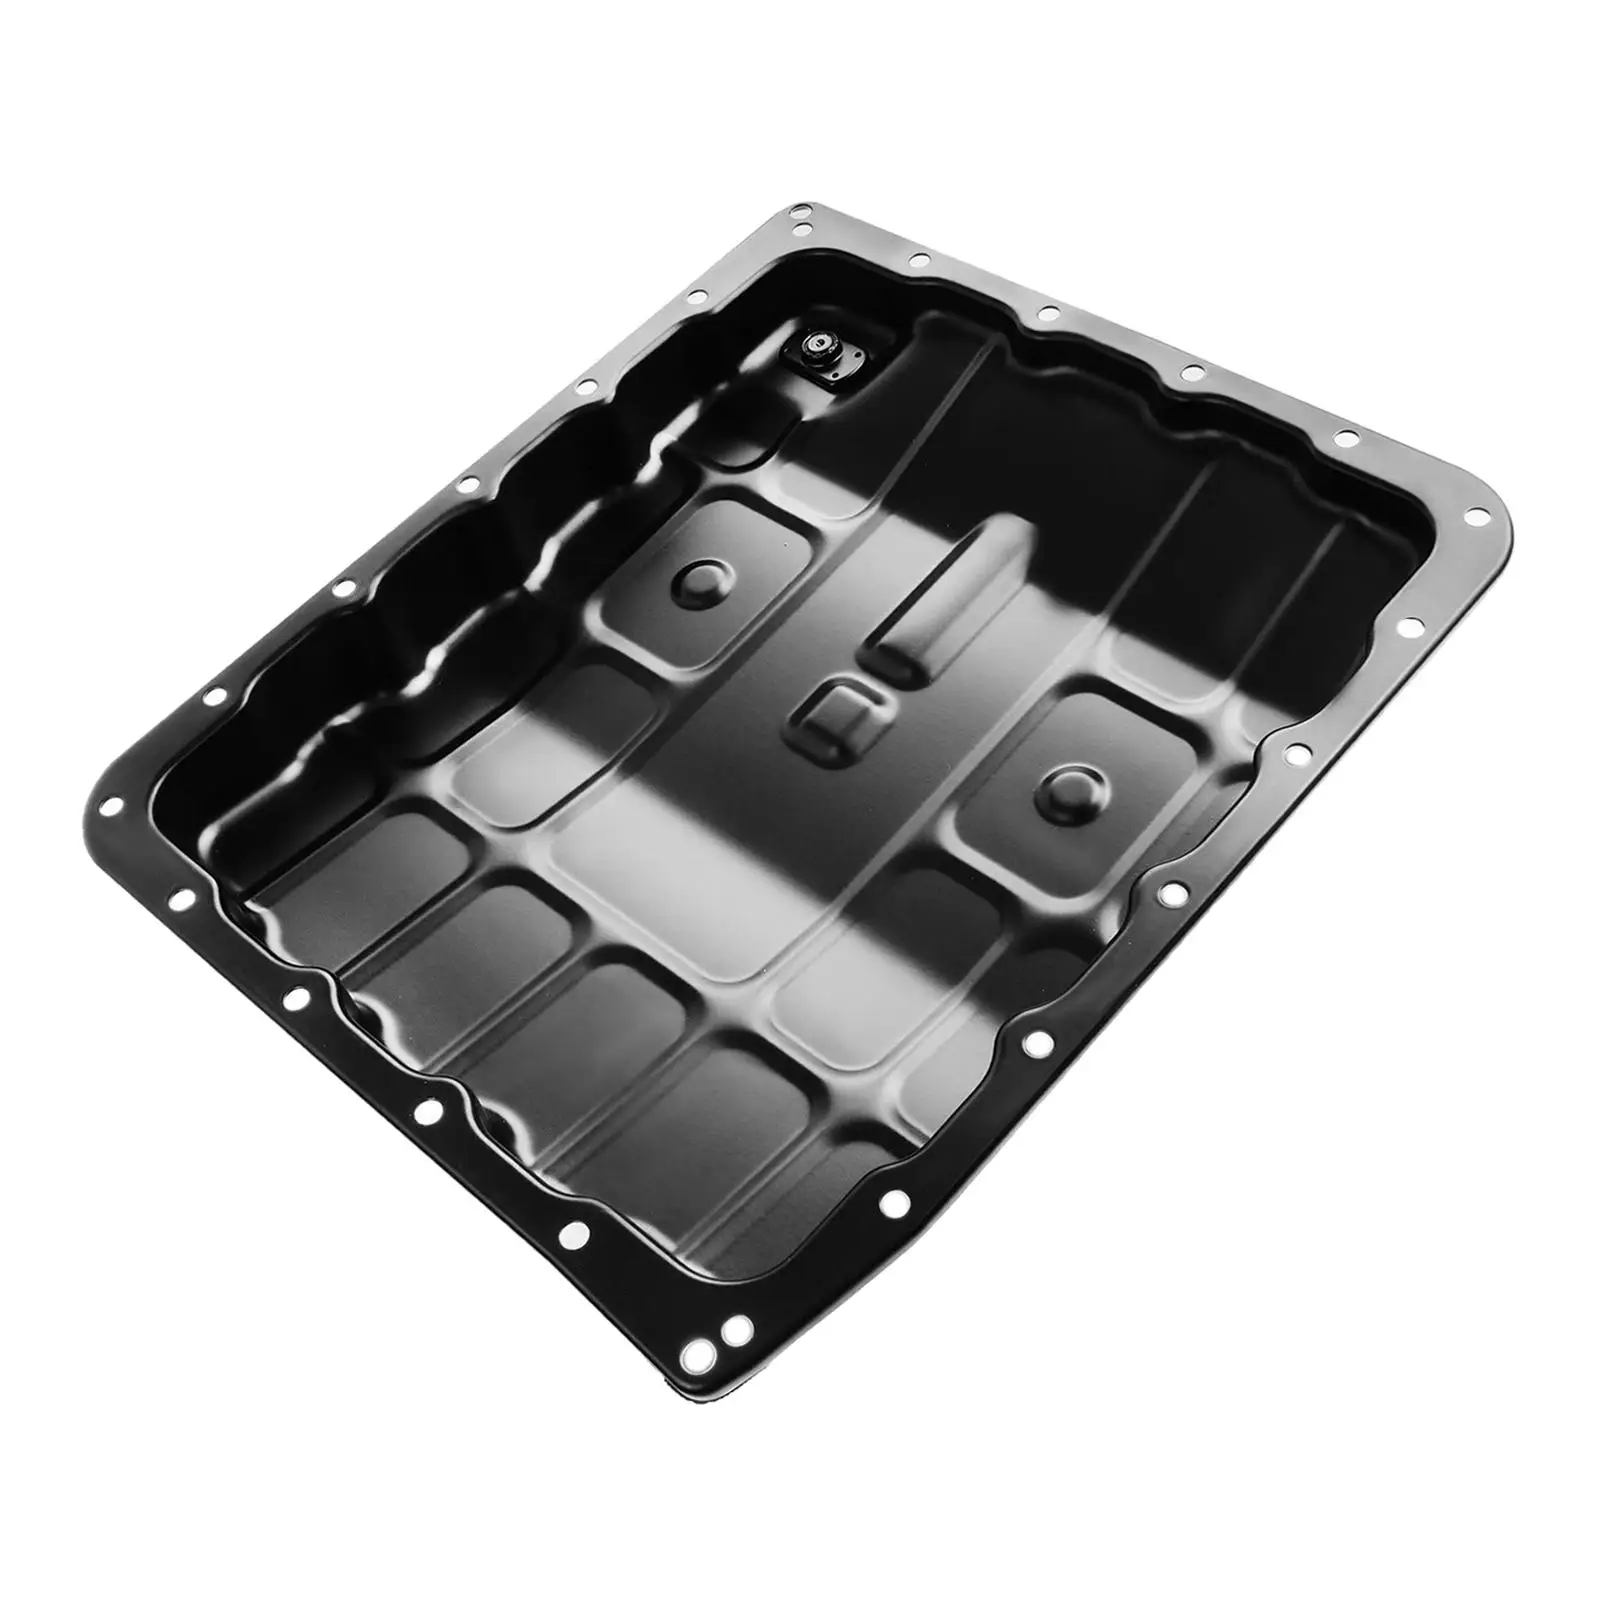 Transmission Oil Pan 3139090x00 Supplies Durable Replaces Accessory Automobile for Nissan Armada Pathfinder Titan Frontier